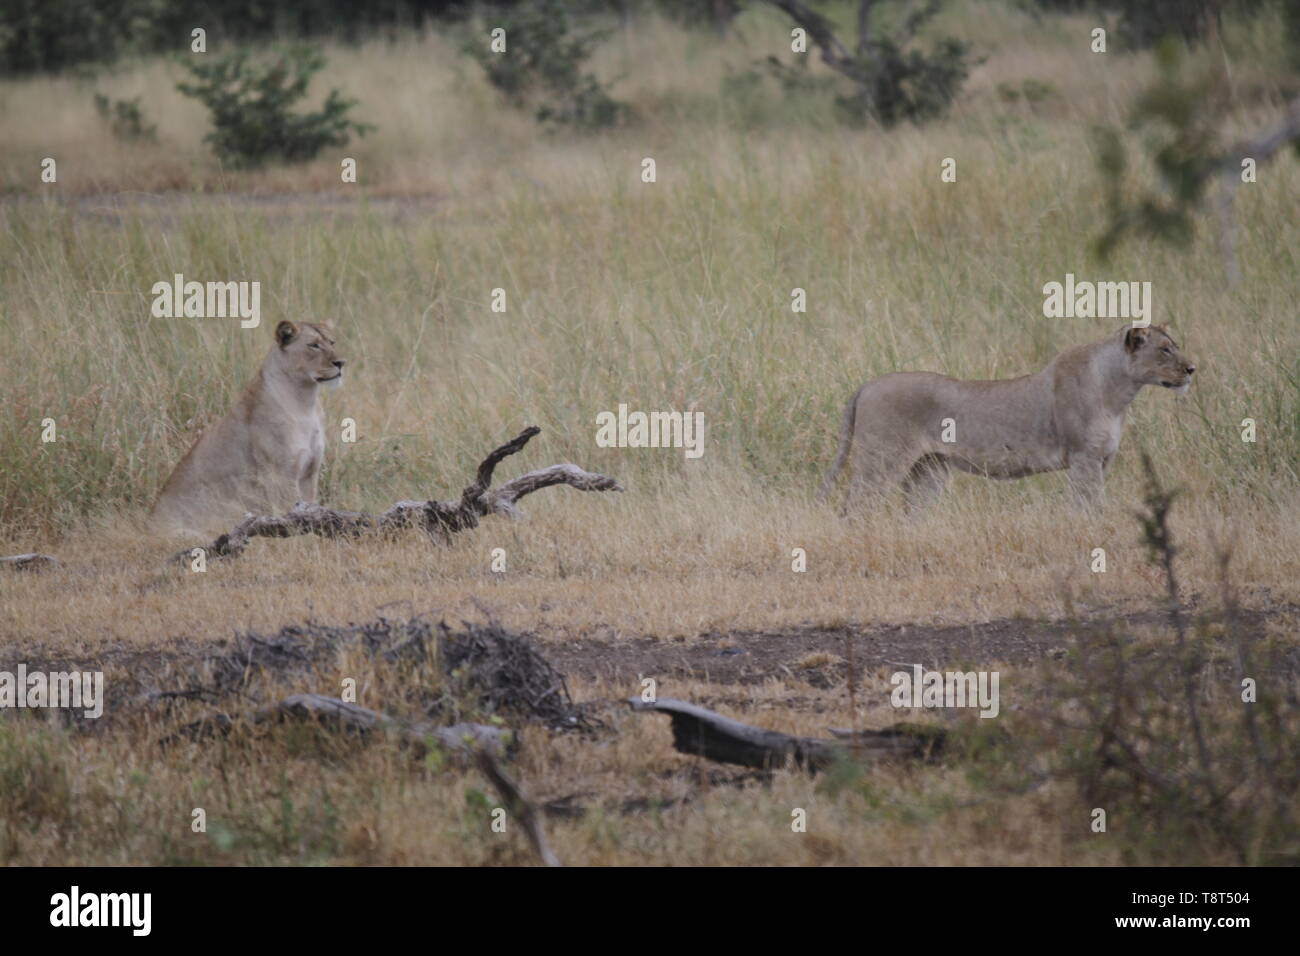 Lioness's hunting Stock Photo